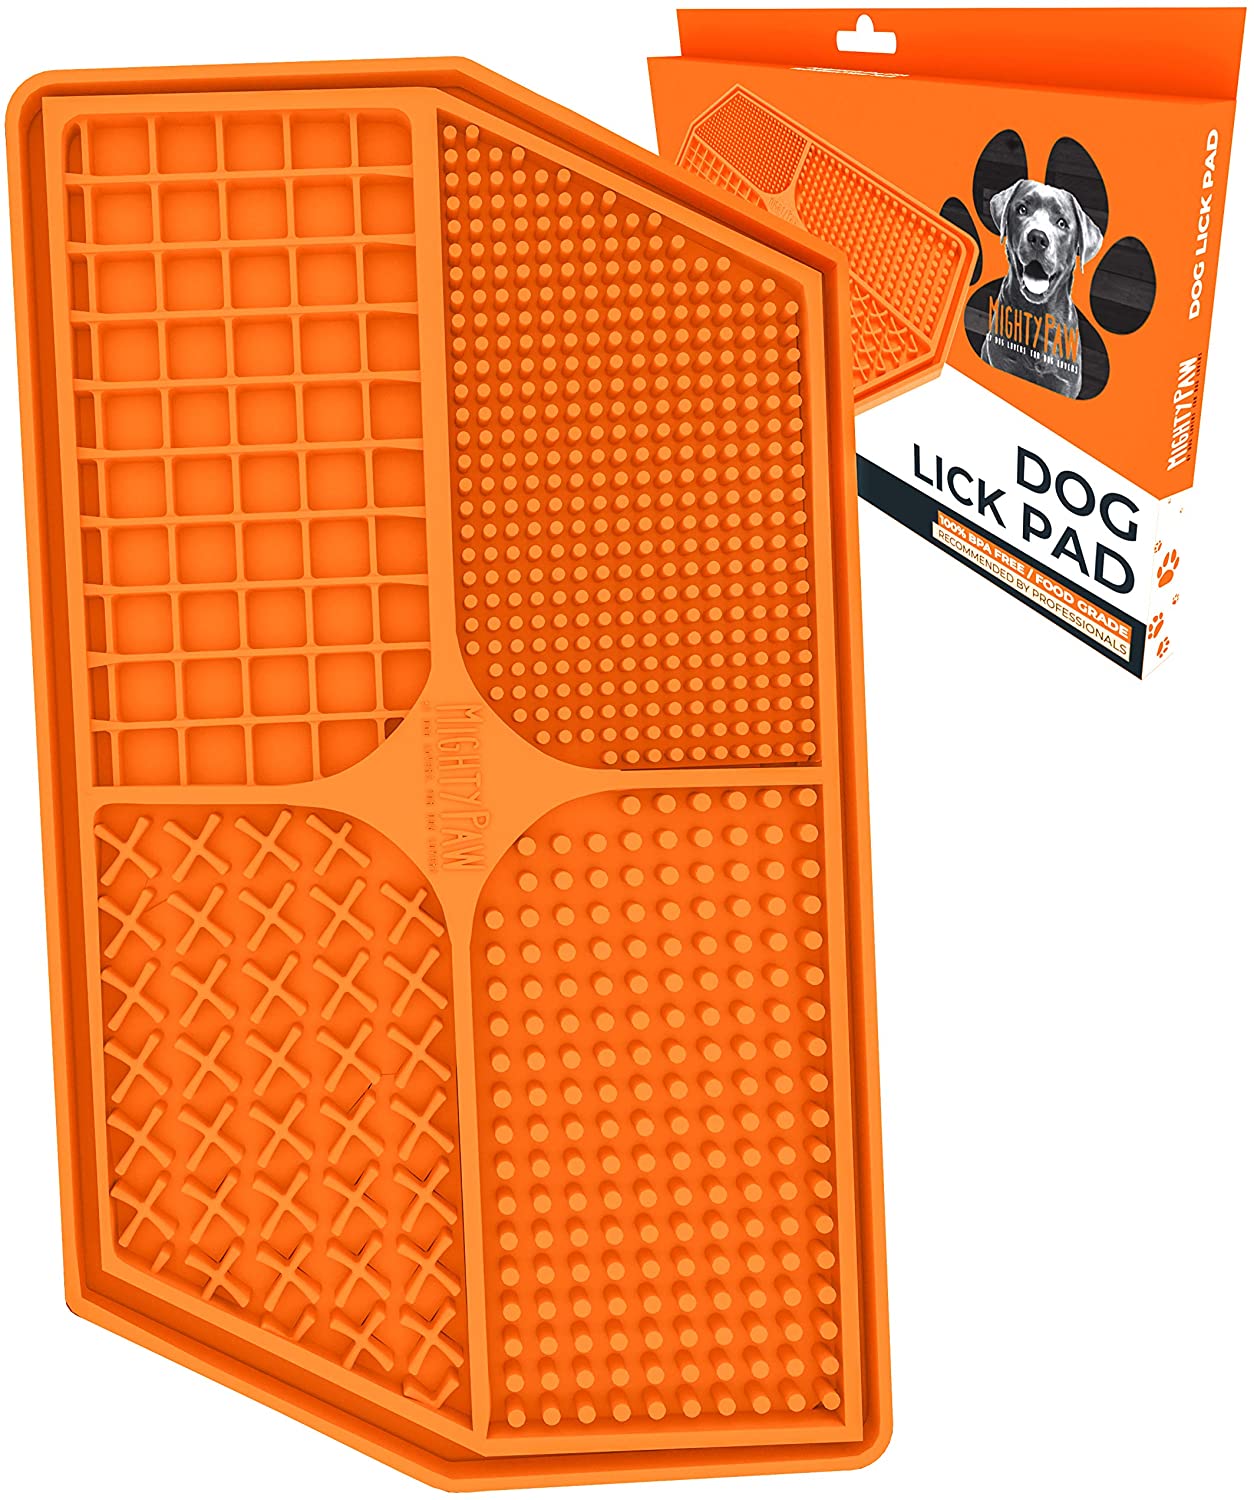 Calming Dog Lick Pad - Rescue with Four Textured Quadrants